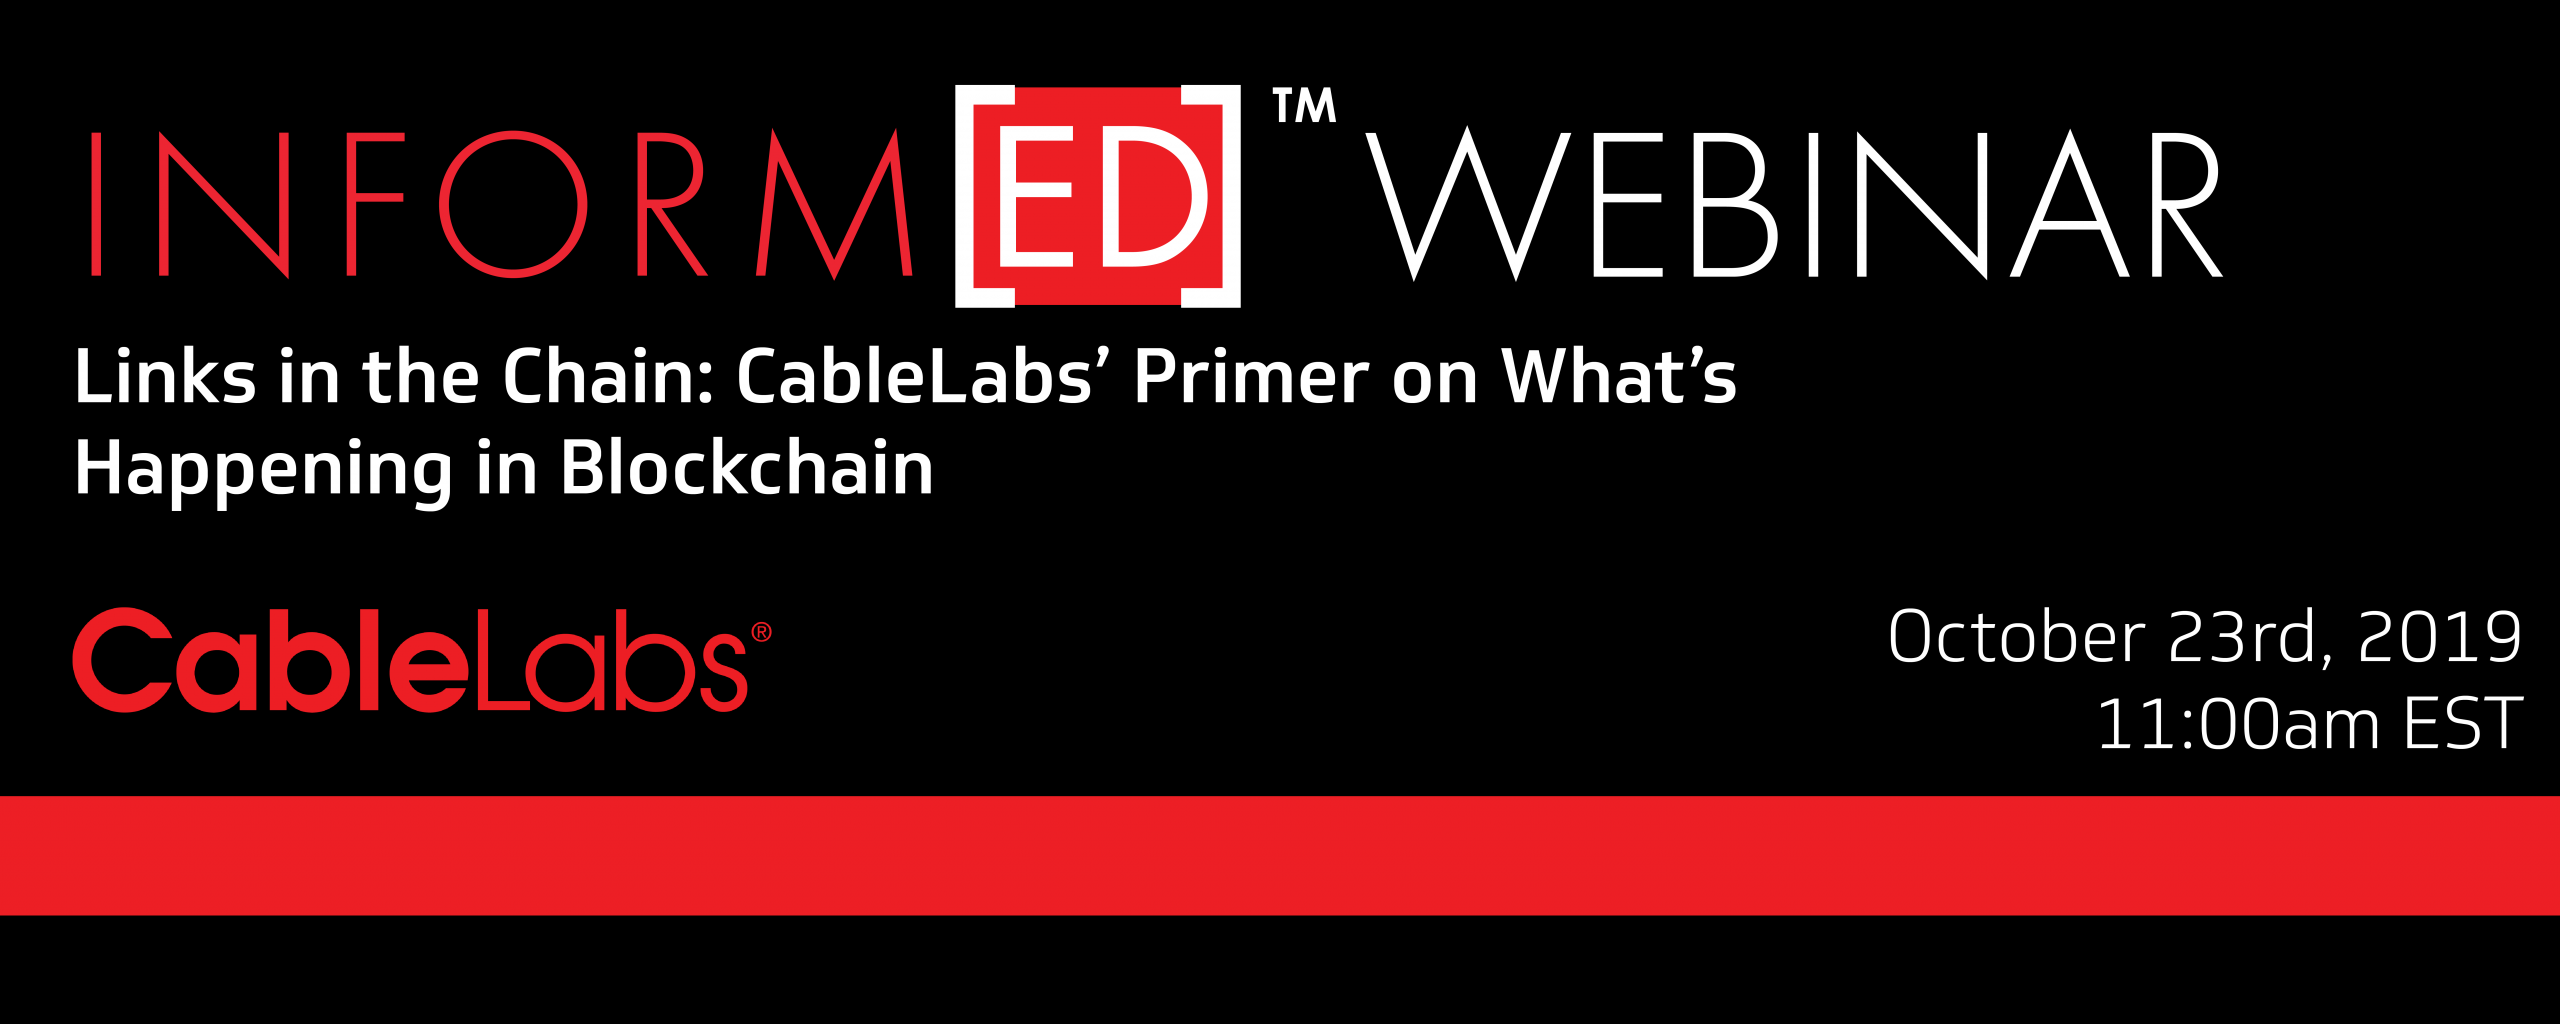 Inform[ED] Webinar: Links in the Chain: CableLabs’ Primer on What’s Happening in Blockchain